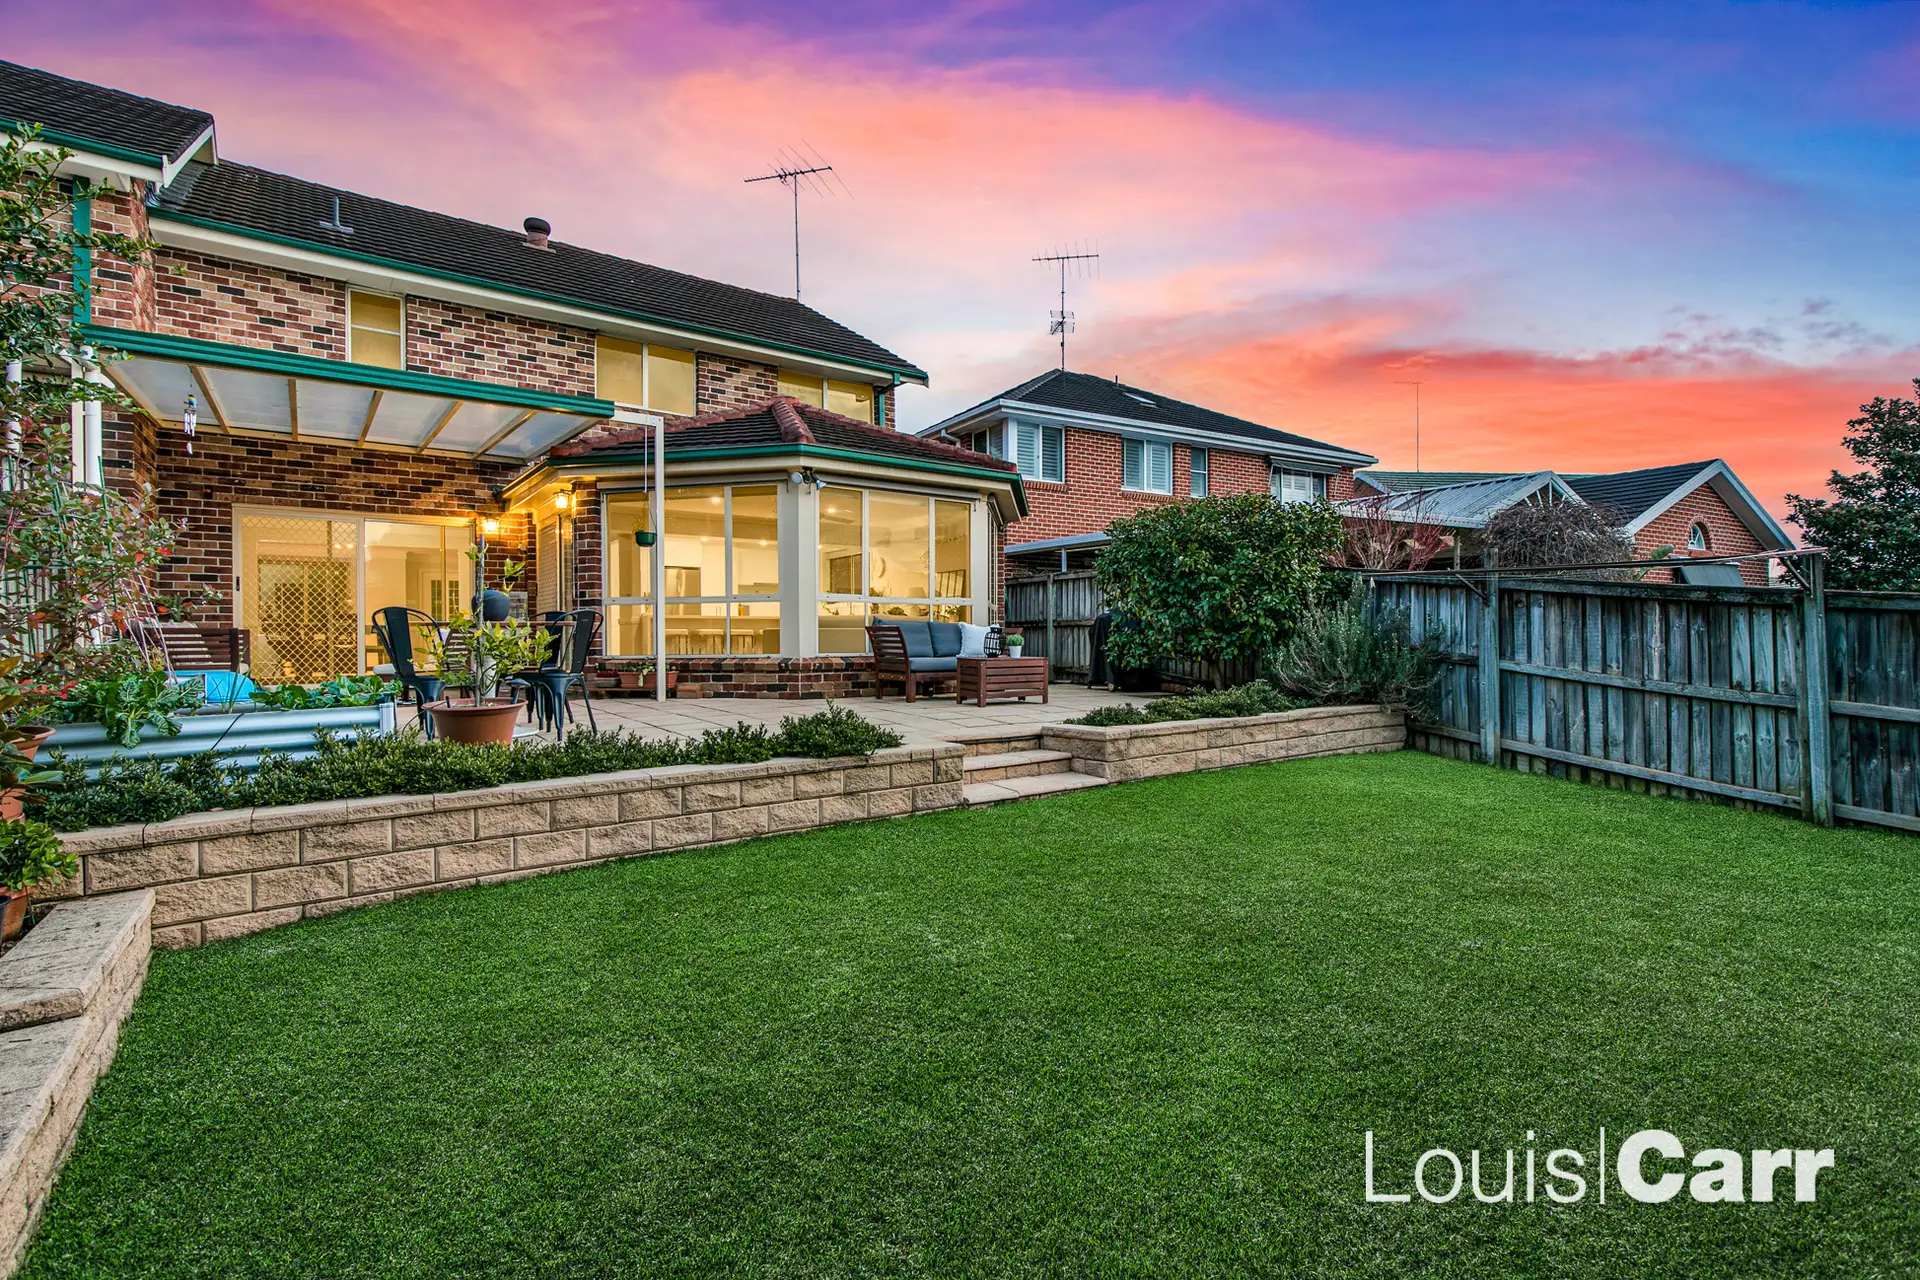 Photo #3: 1/16 Darlington Drive, Cherrybrook - Sold by Louis Carr Real Estate